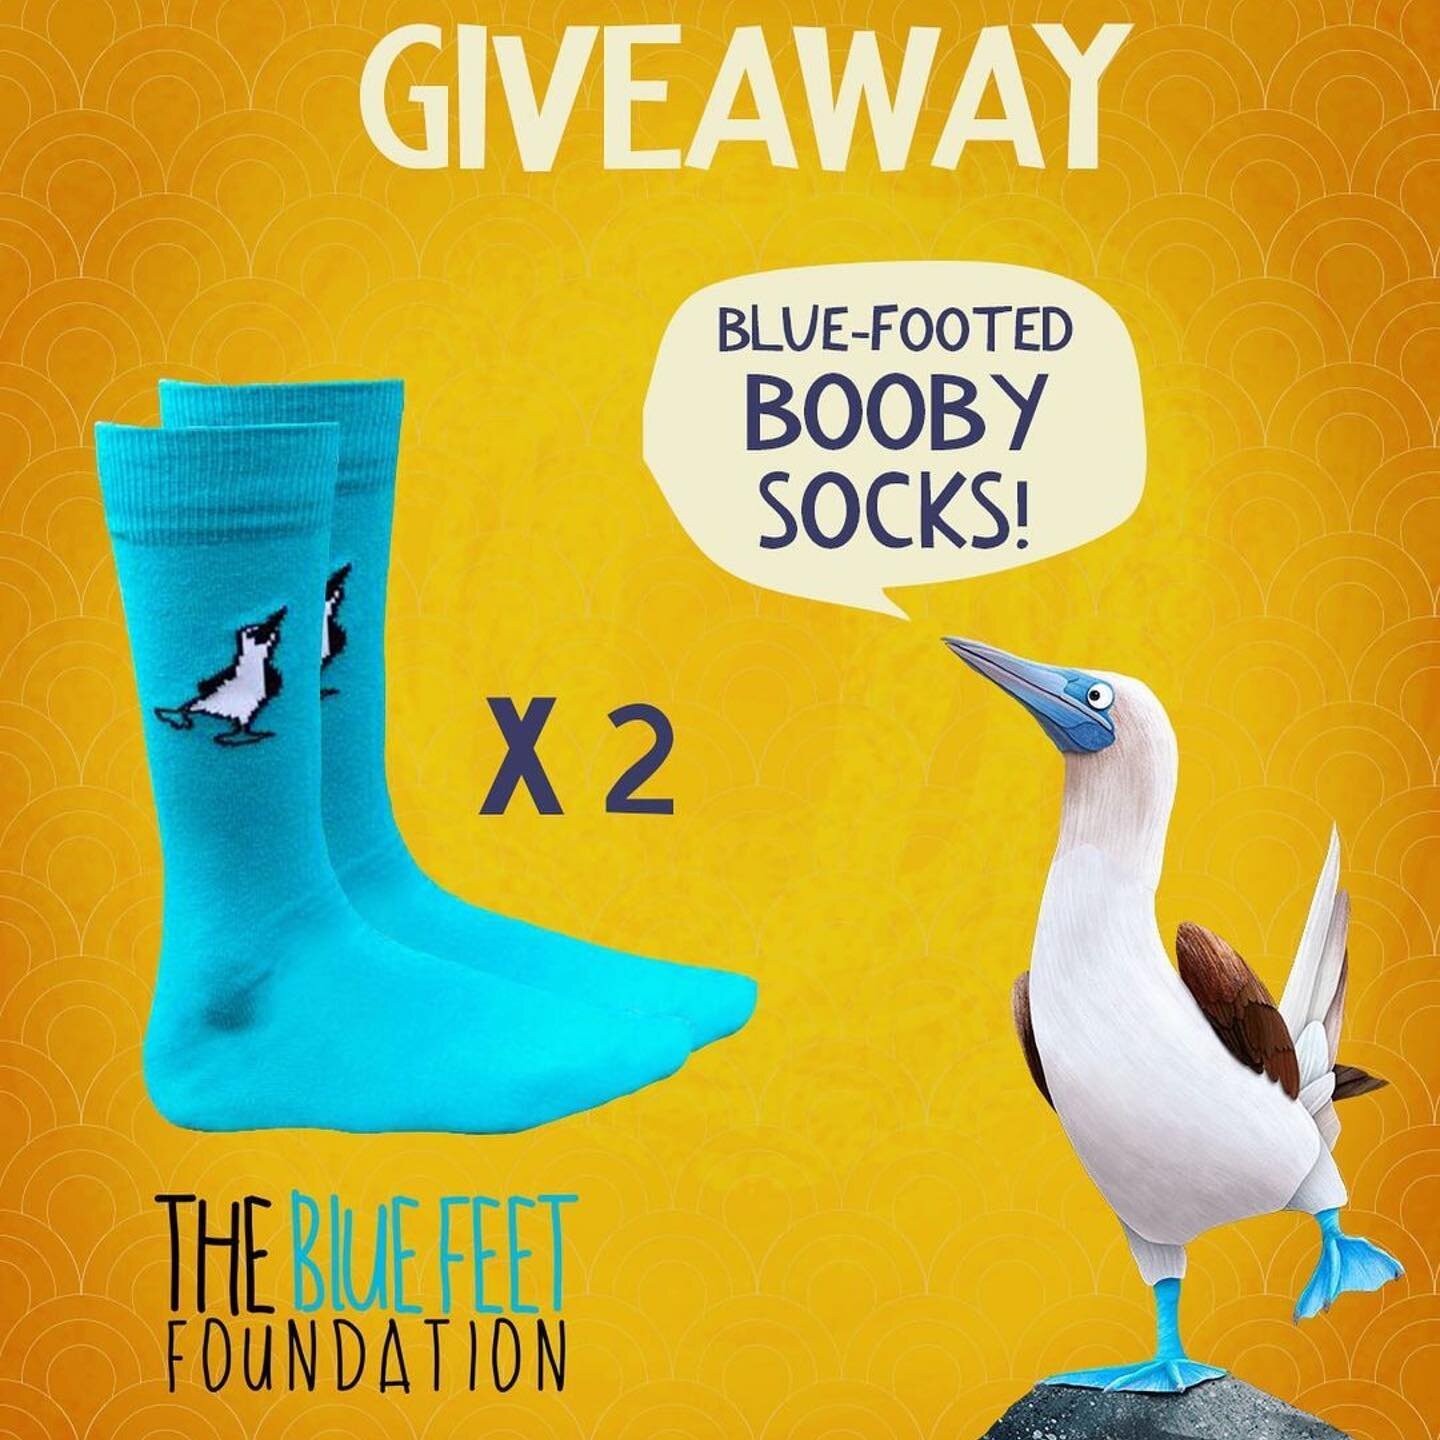 Enter our contest with @creechakids
・・・
We have a special giveaway in collaboration with our friends at the Blue Feet Foundation!
We are giving away 2 x pairs of awesome bright Blue Booby socks which are made in Ecuador! Home of the Galapagos Islands